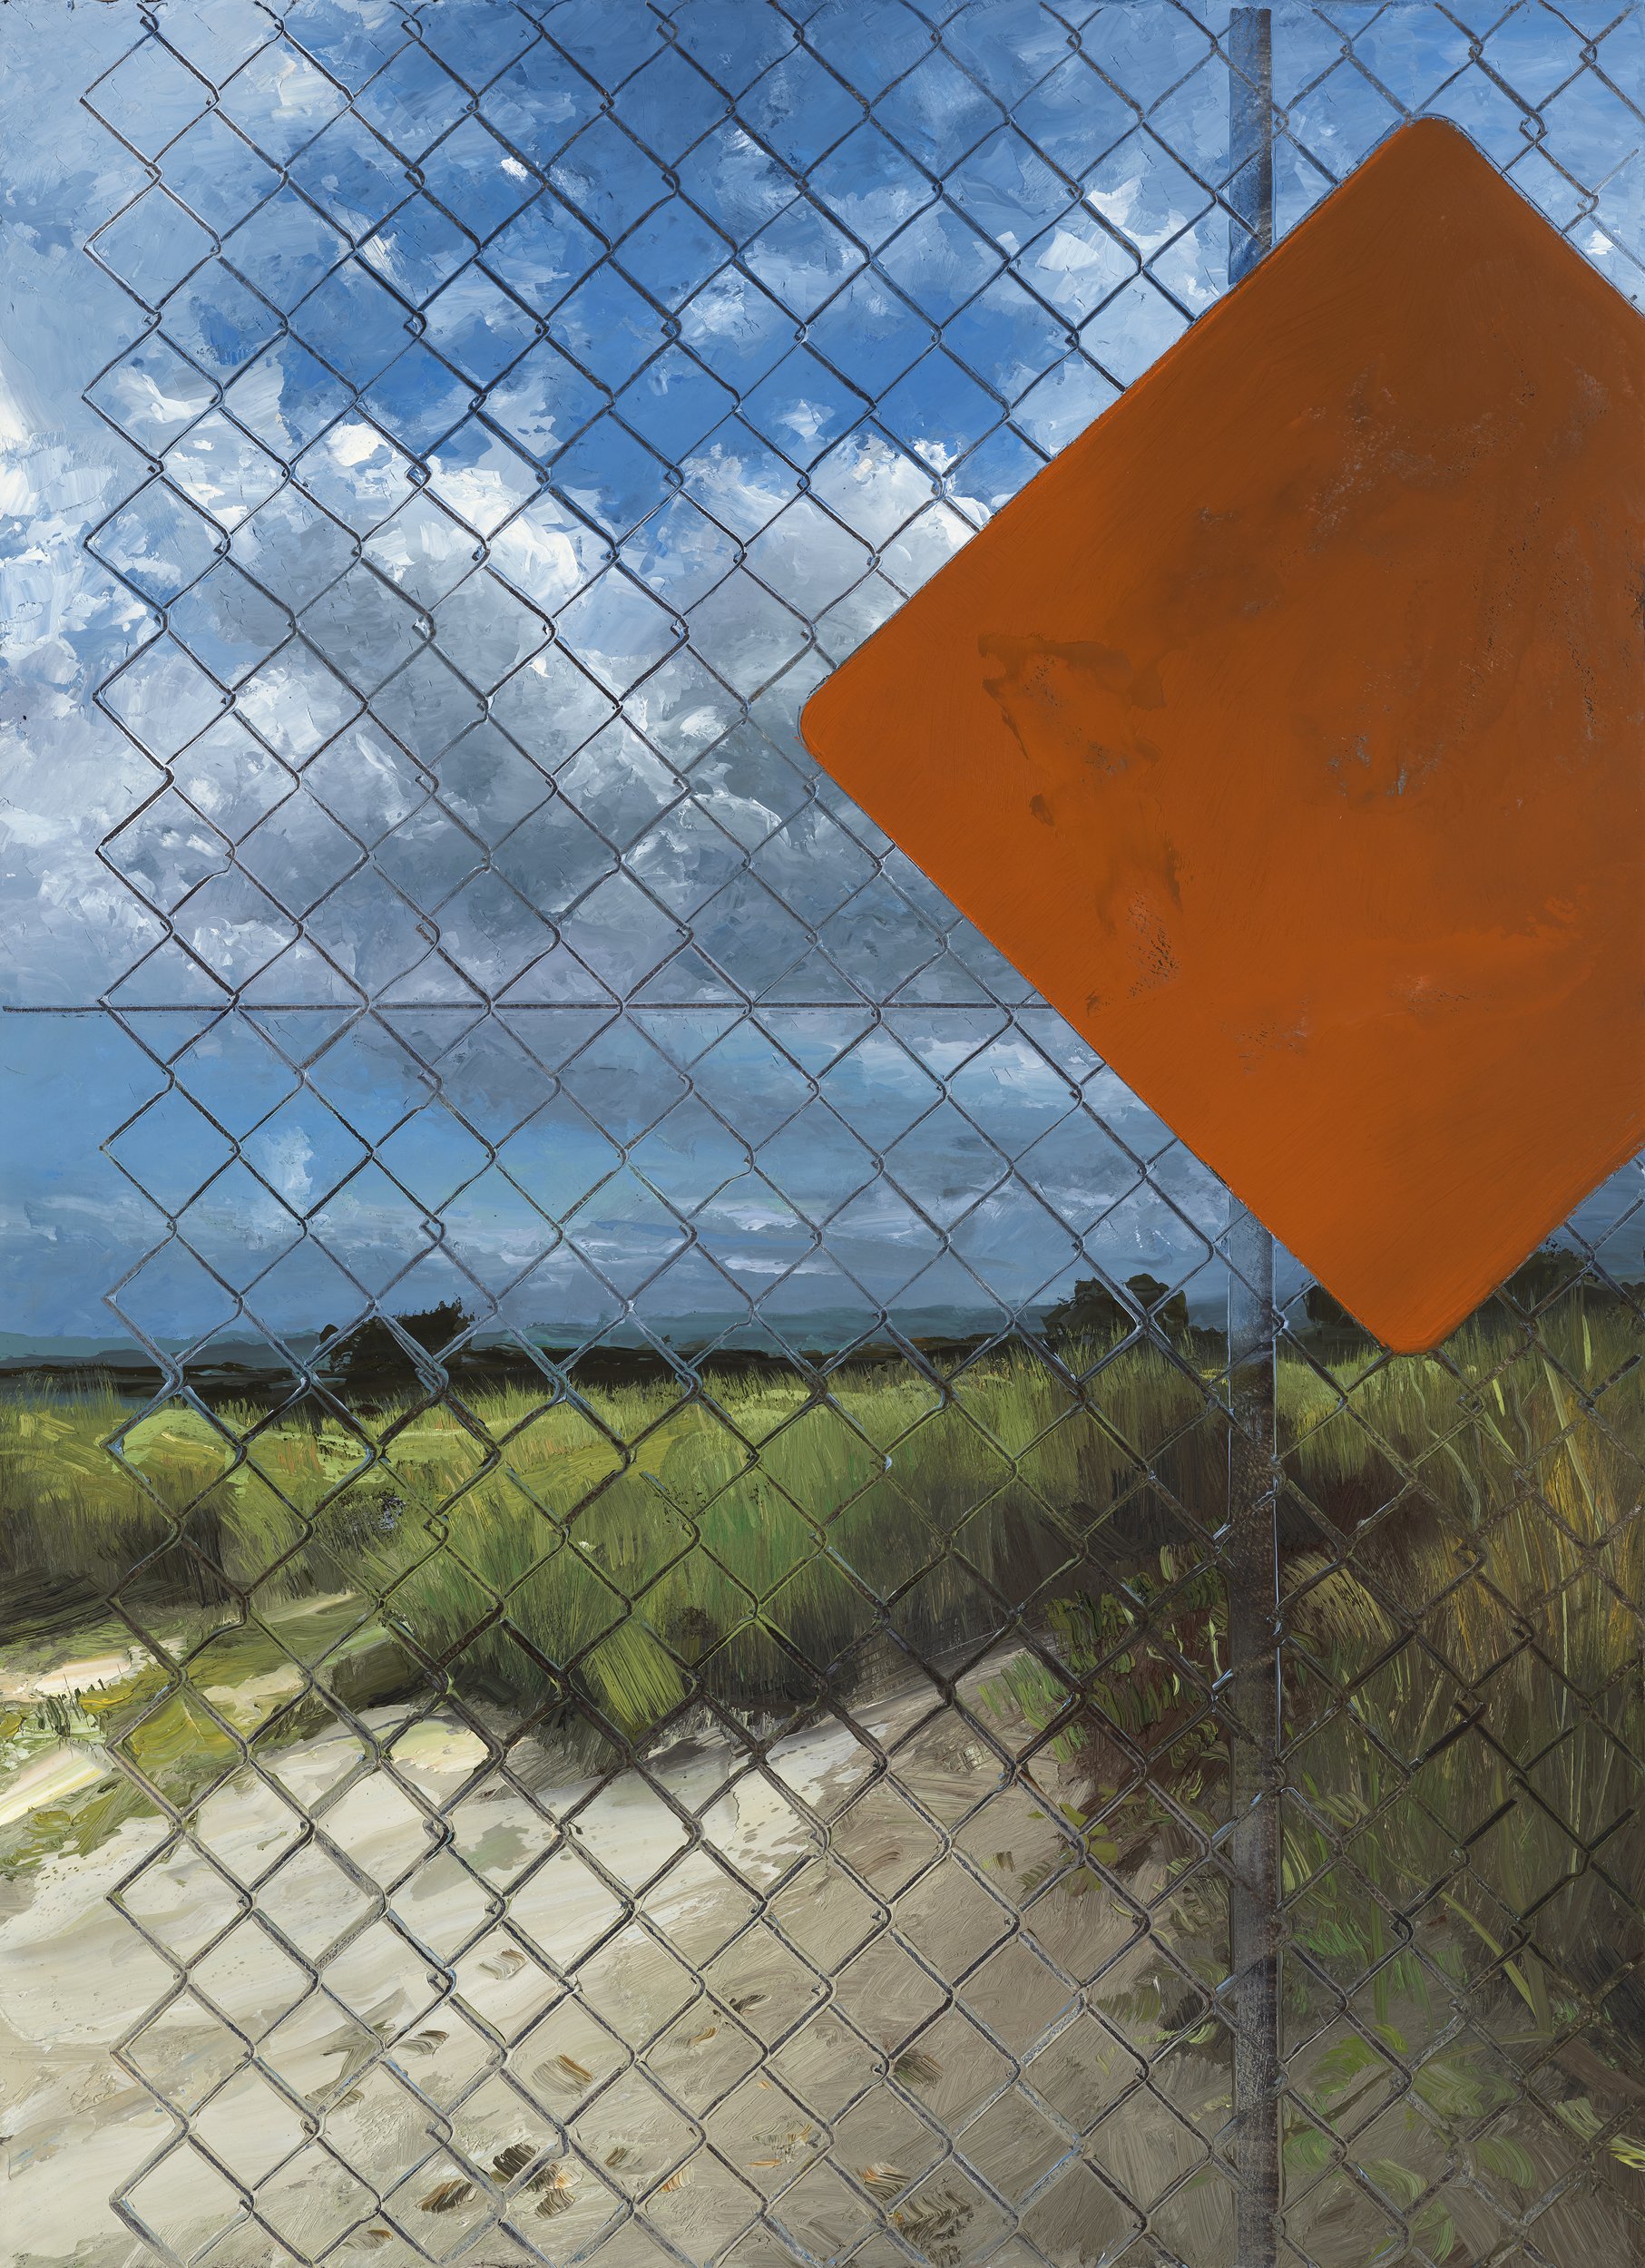 Fence/Sign Dunes (#2131)